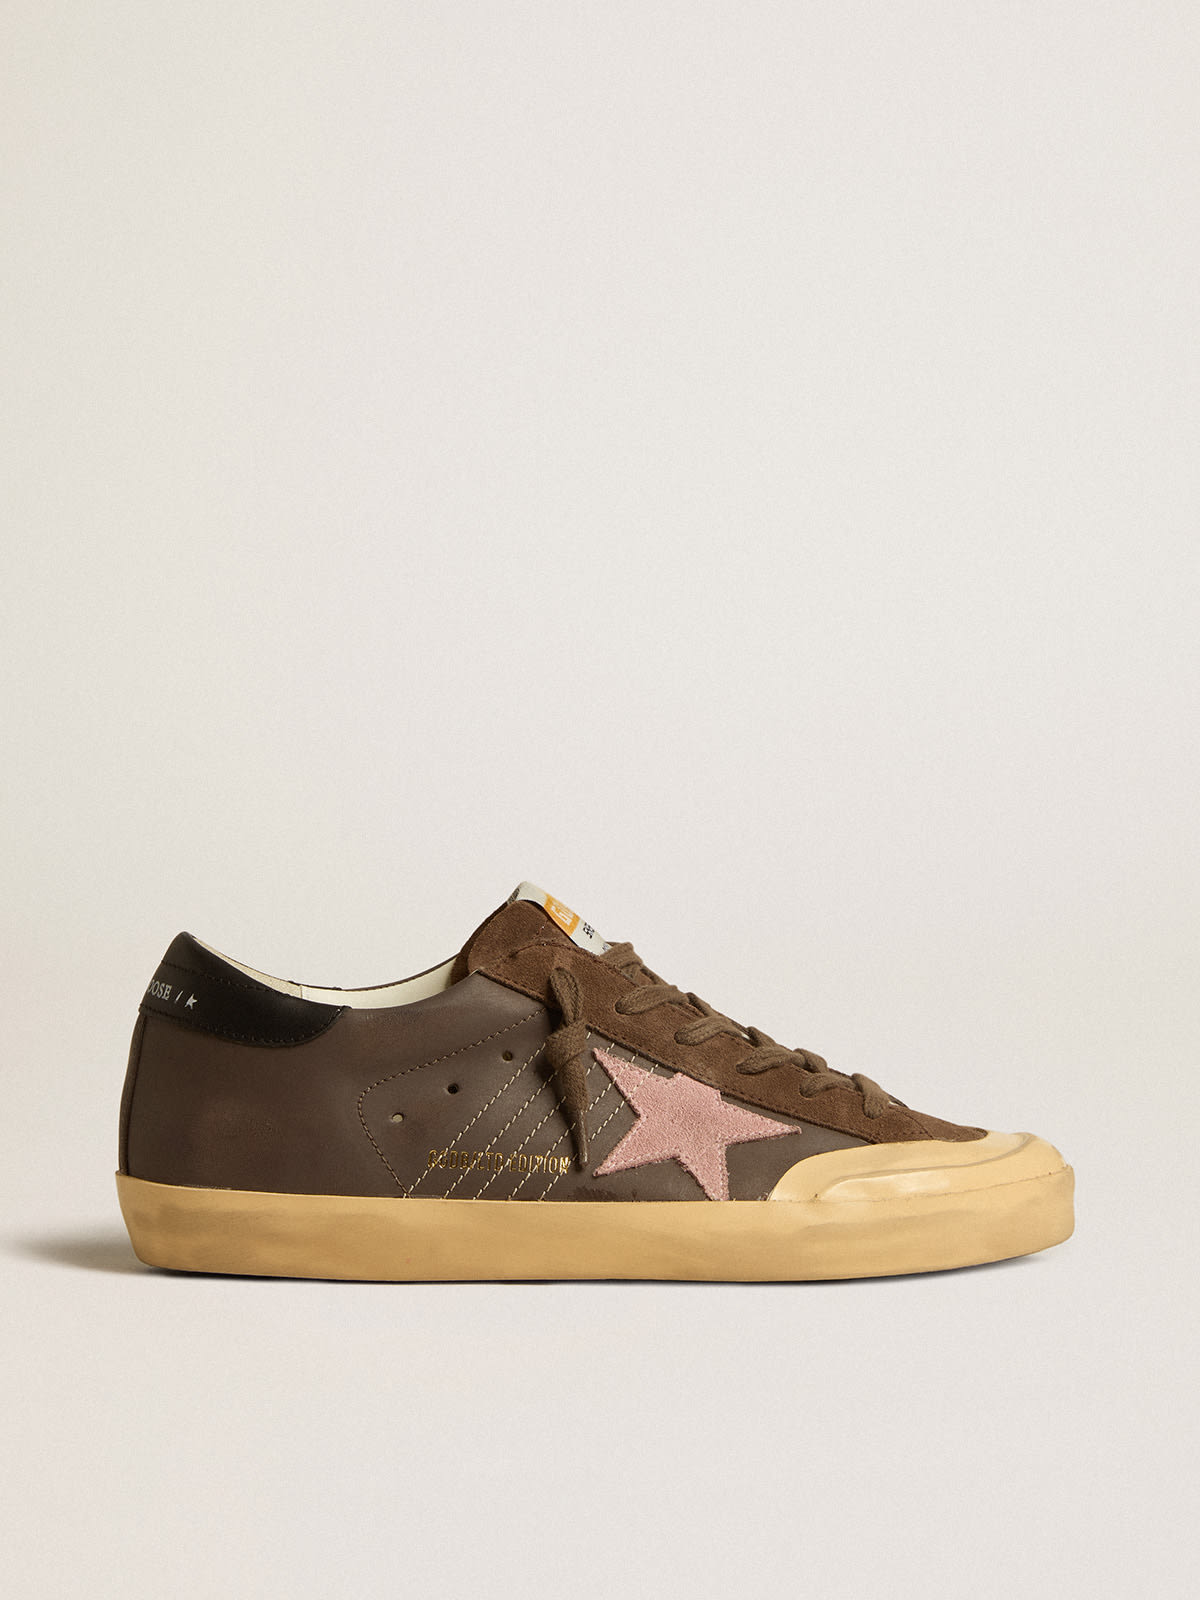 Golden Goose - Super-Star Penstar LTD in brown leather with pink suede star in 